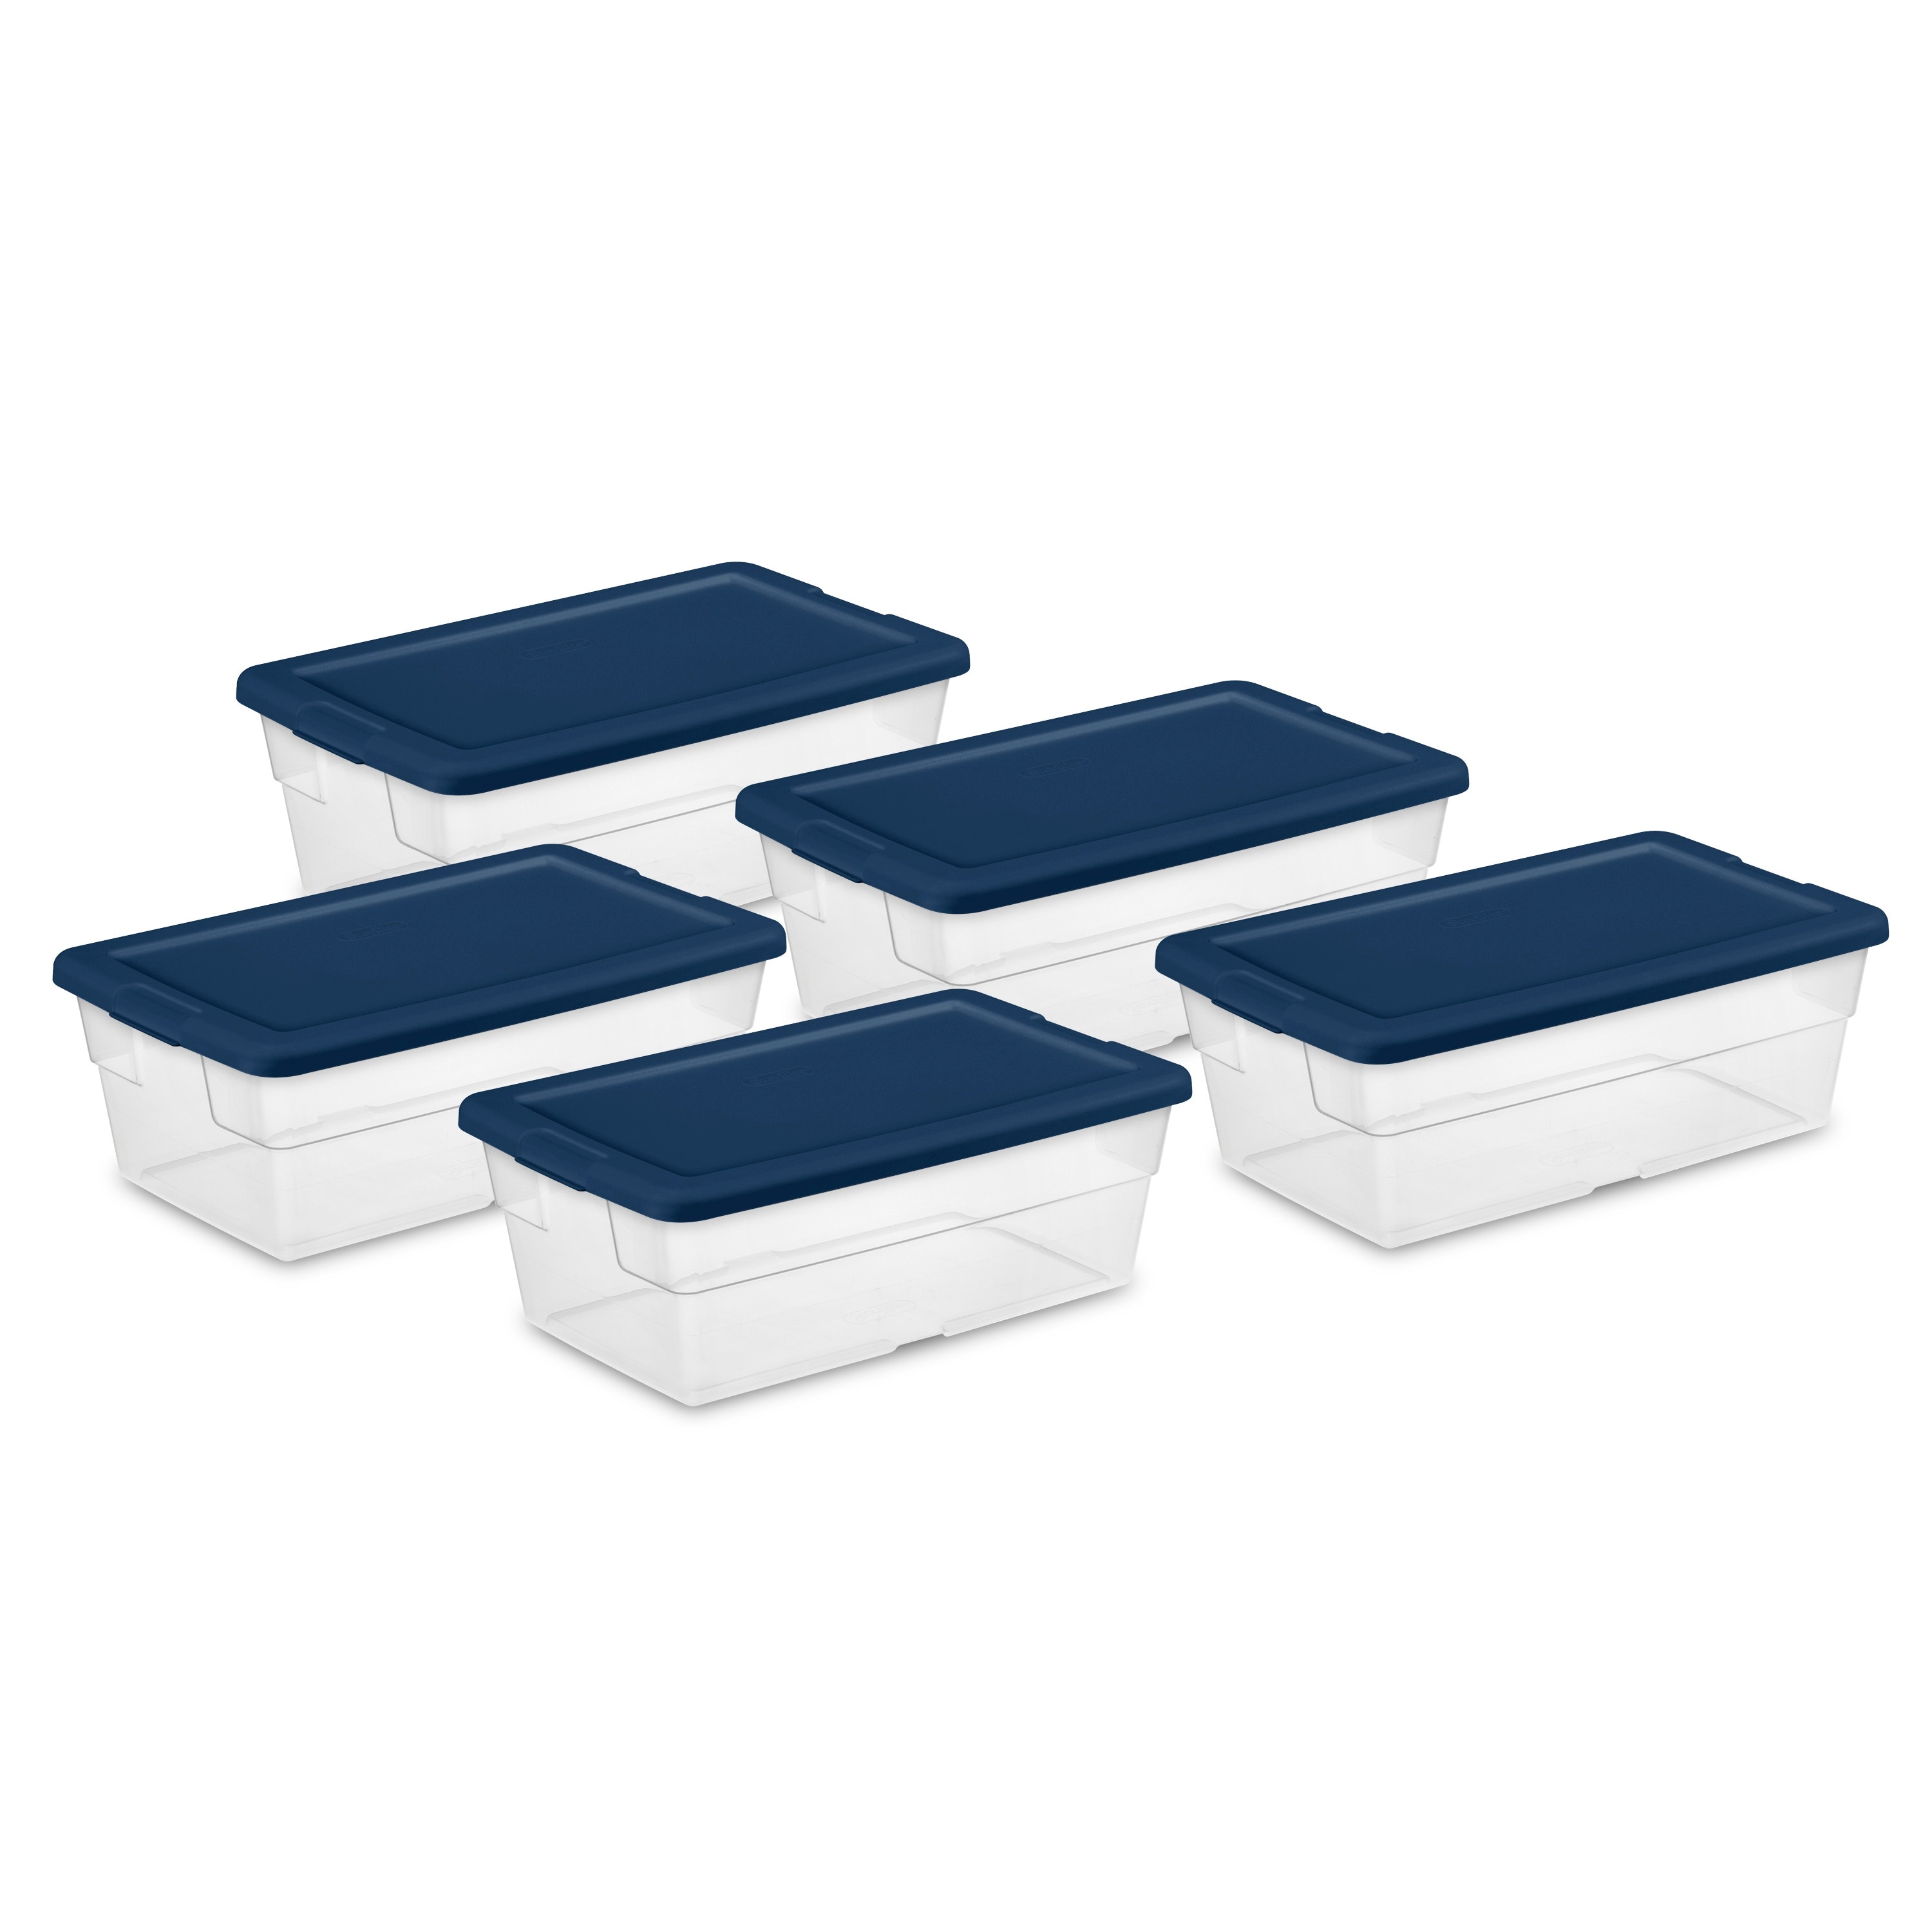 https://ak1.ostkcdn.com/images/products/is/images/direct/9ca09ad7ffe94f6737a57a3f730d7cc911151de9/Sterilite-Stackable-6-Qt-Storage-Box-Container%2C-Clear%2C-Marine-Blue-Lid-%2830-Pack%29.jpg